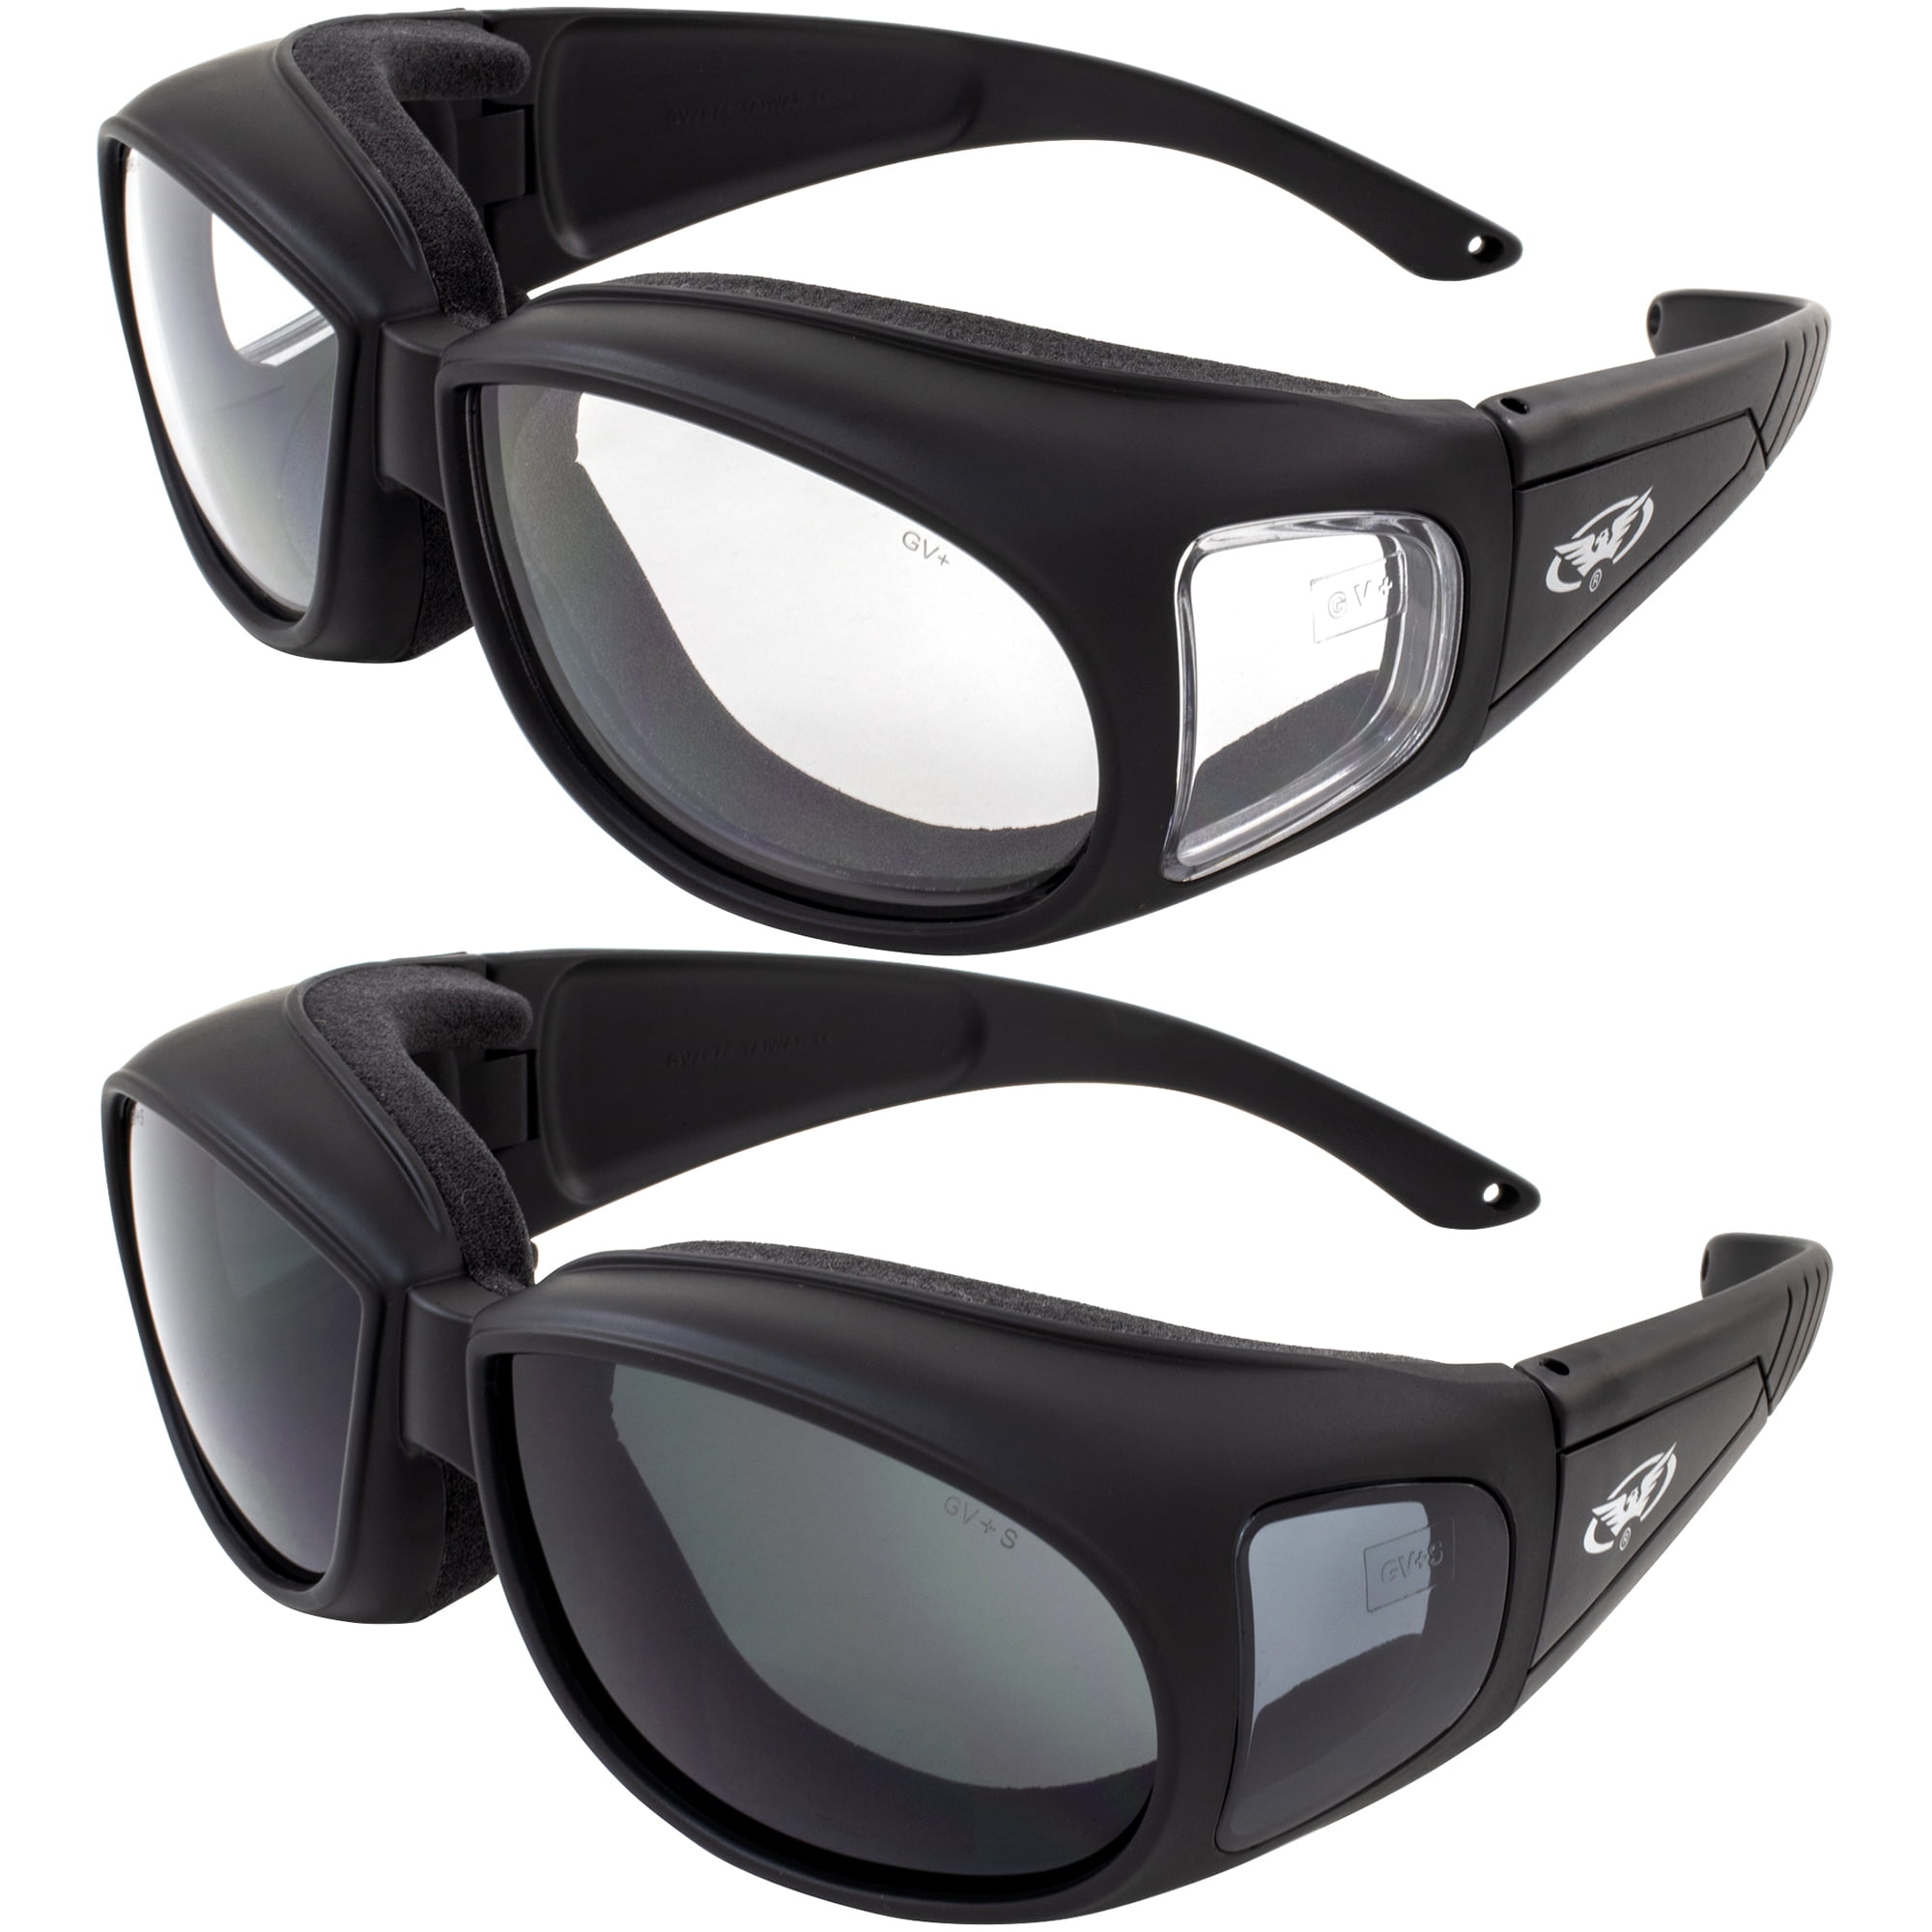 New Clear Motorcycle Anti-Fog Glasses/UV400 Sunglasses Free Pouch & Postage 